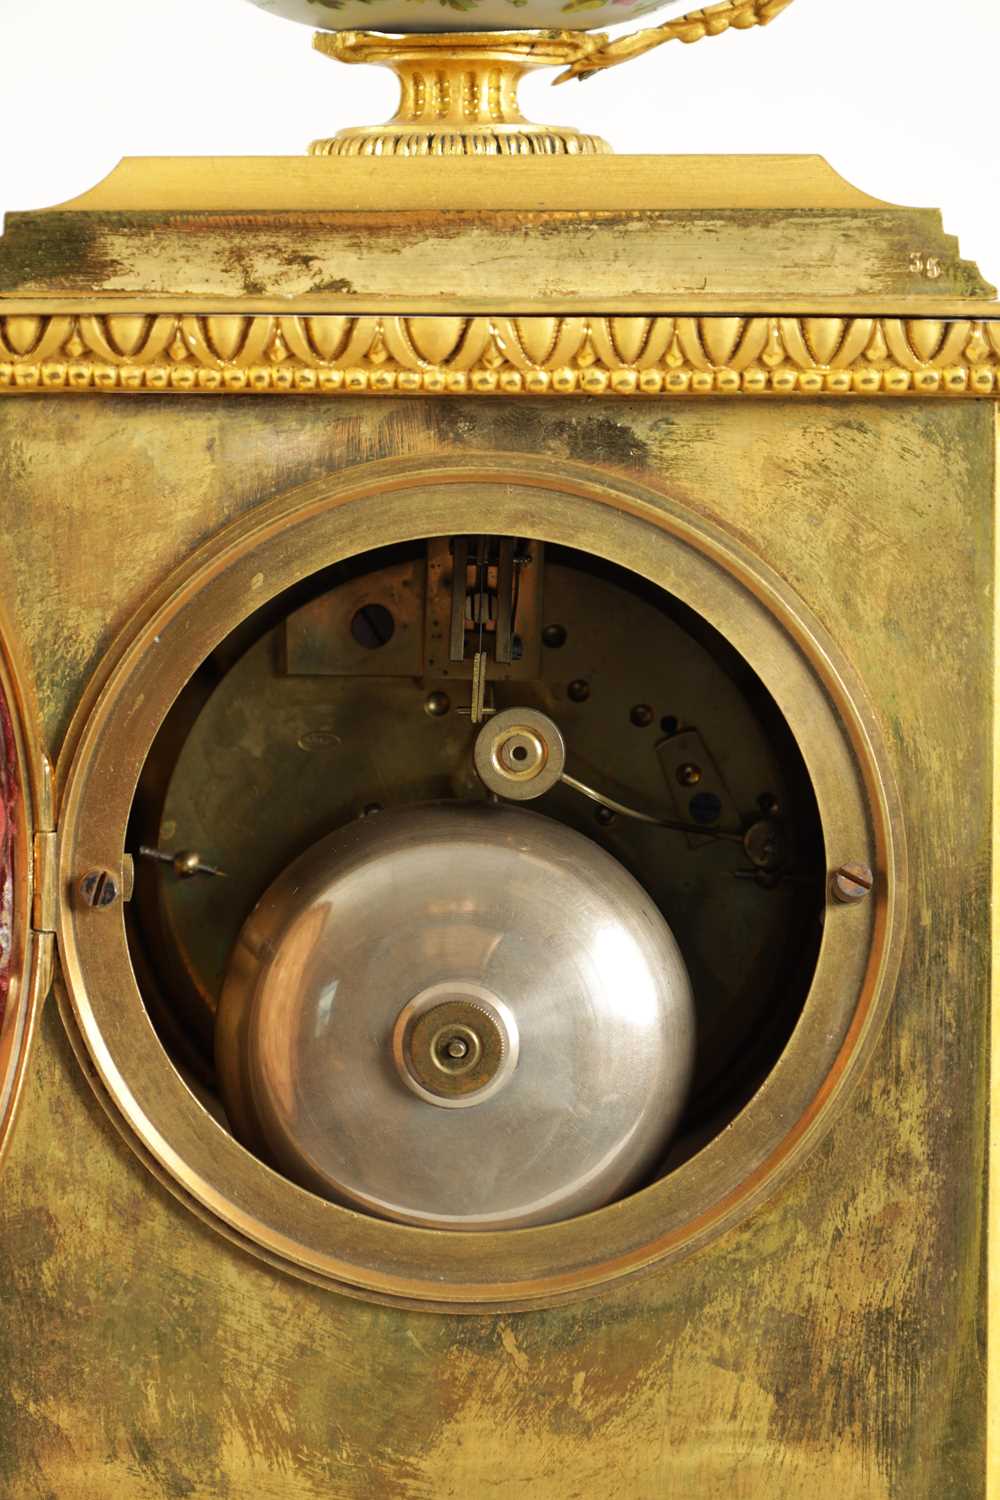 A GOOD QUALITY LATE 19TH CENTURY FRENCH ORMOLU AND PORCELAIN PANELLED MANTEL CLOCK - Image 9 of 11